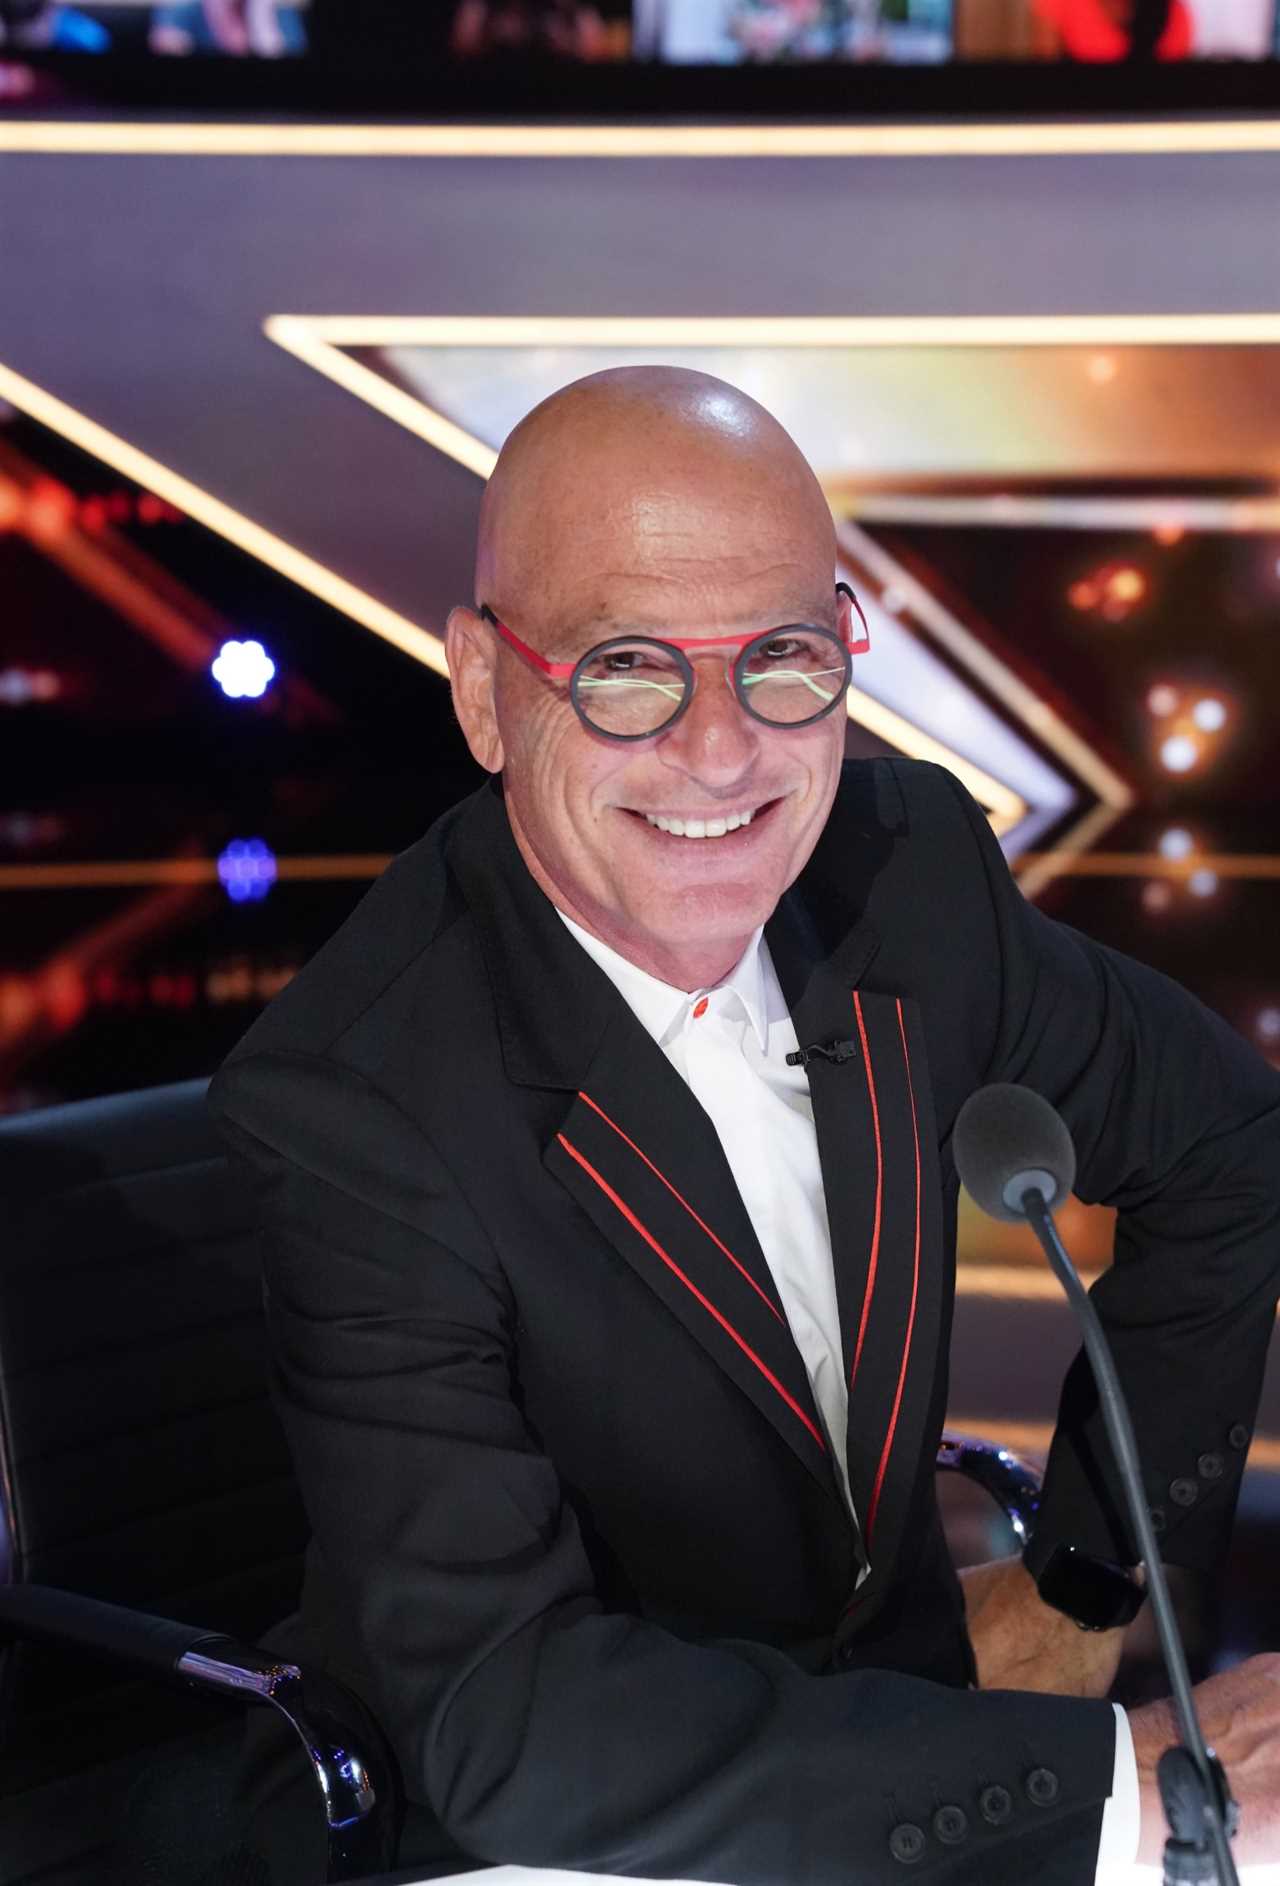 Who are the judges of America’s Got Talent?